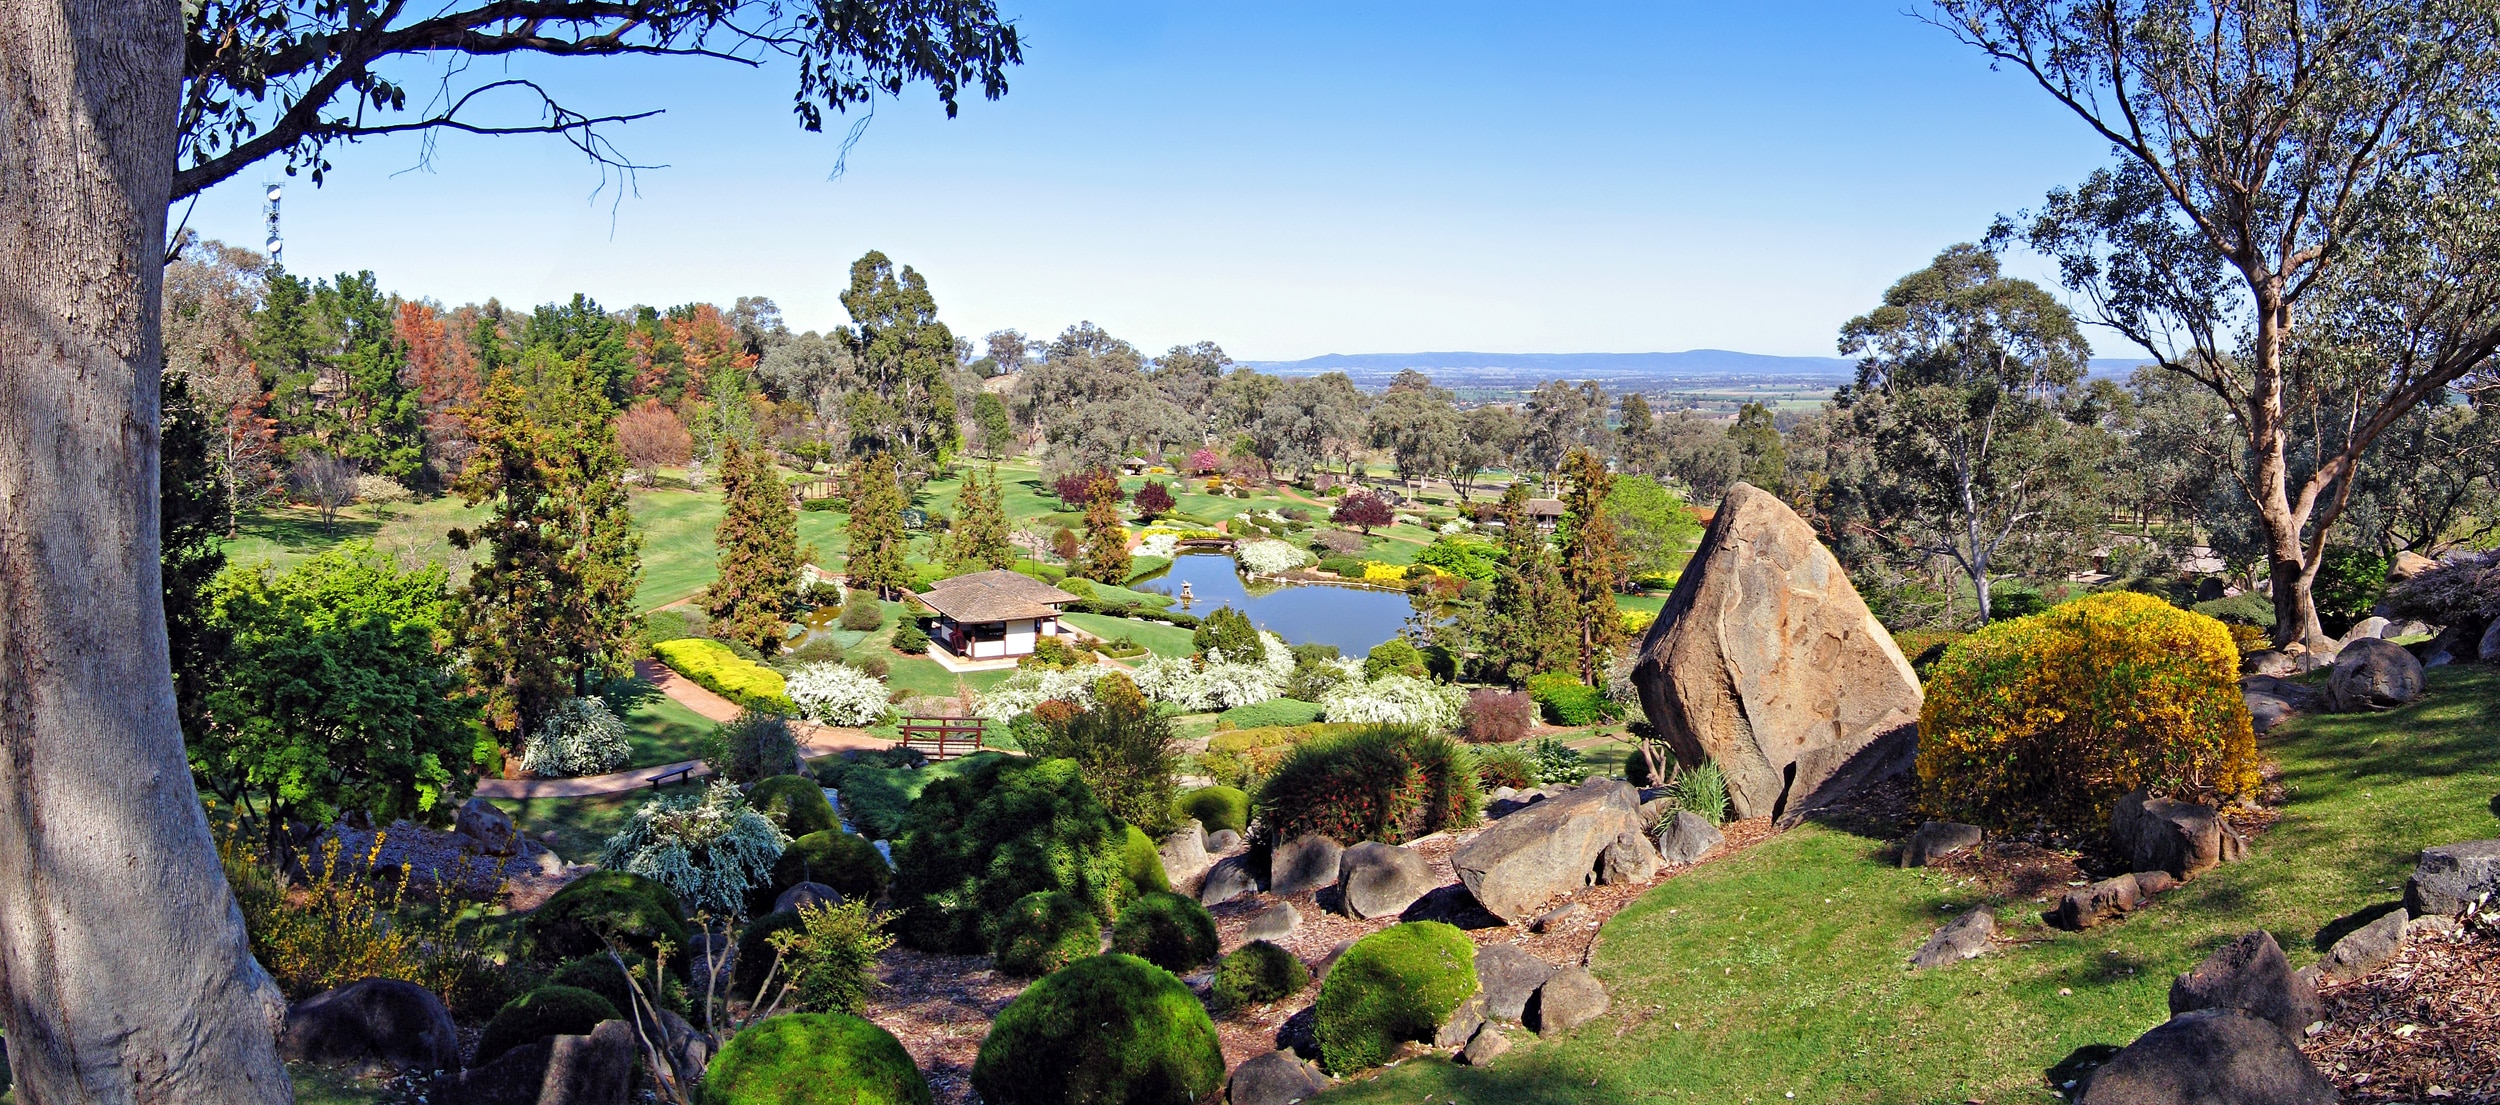 Panoramic view from Cowra Mountain at the Cowra Japanese Garden. The view takes in the gardens and the plains of the Cowra Shire across to the nearby mountains.